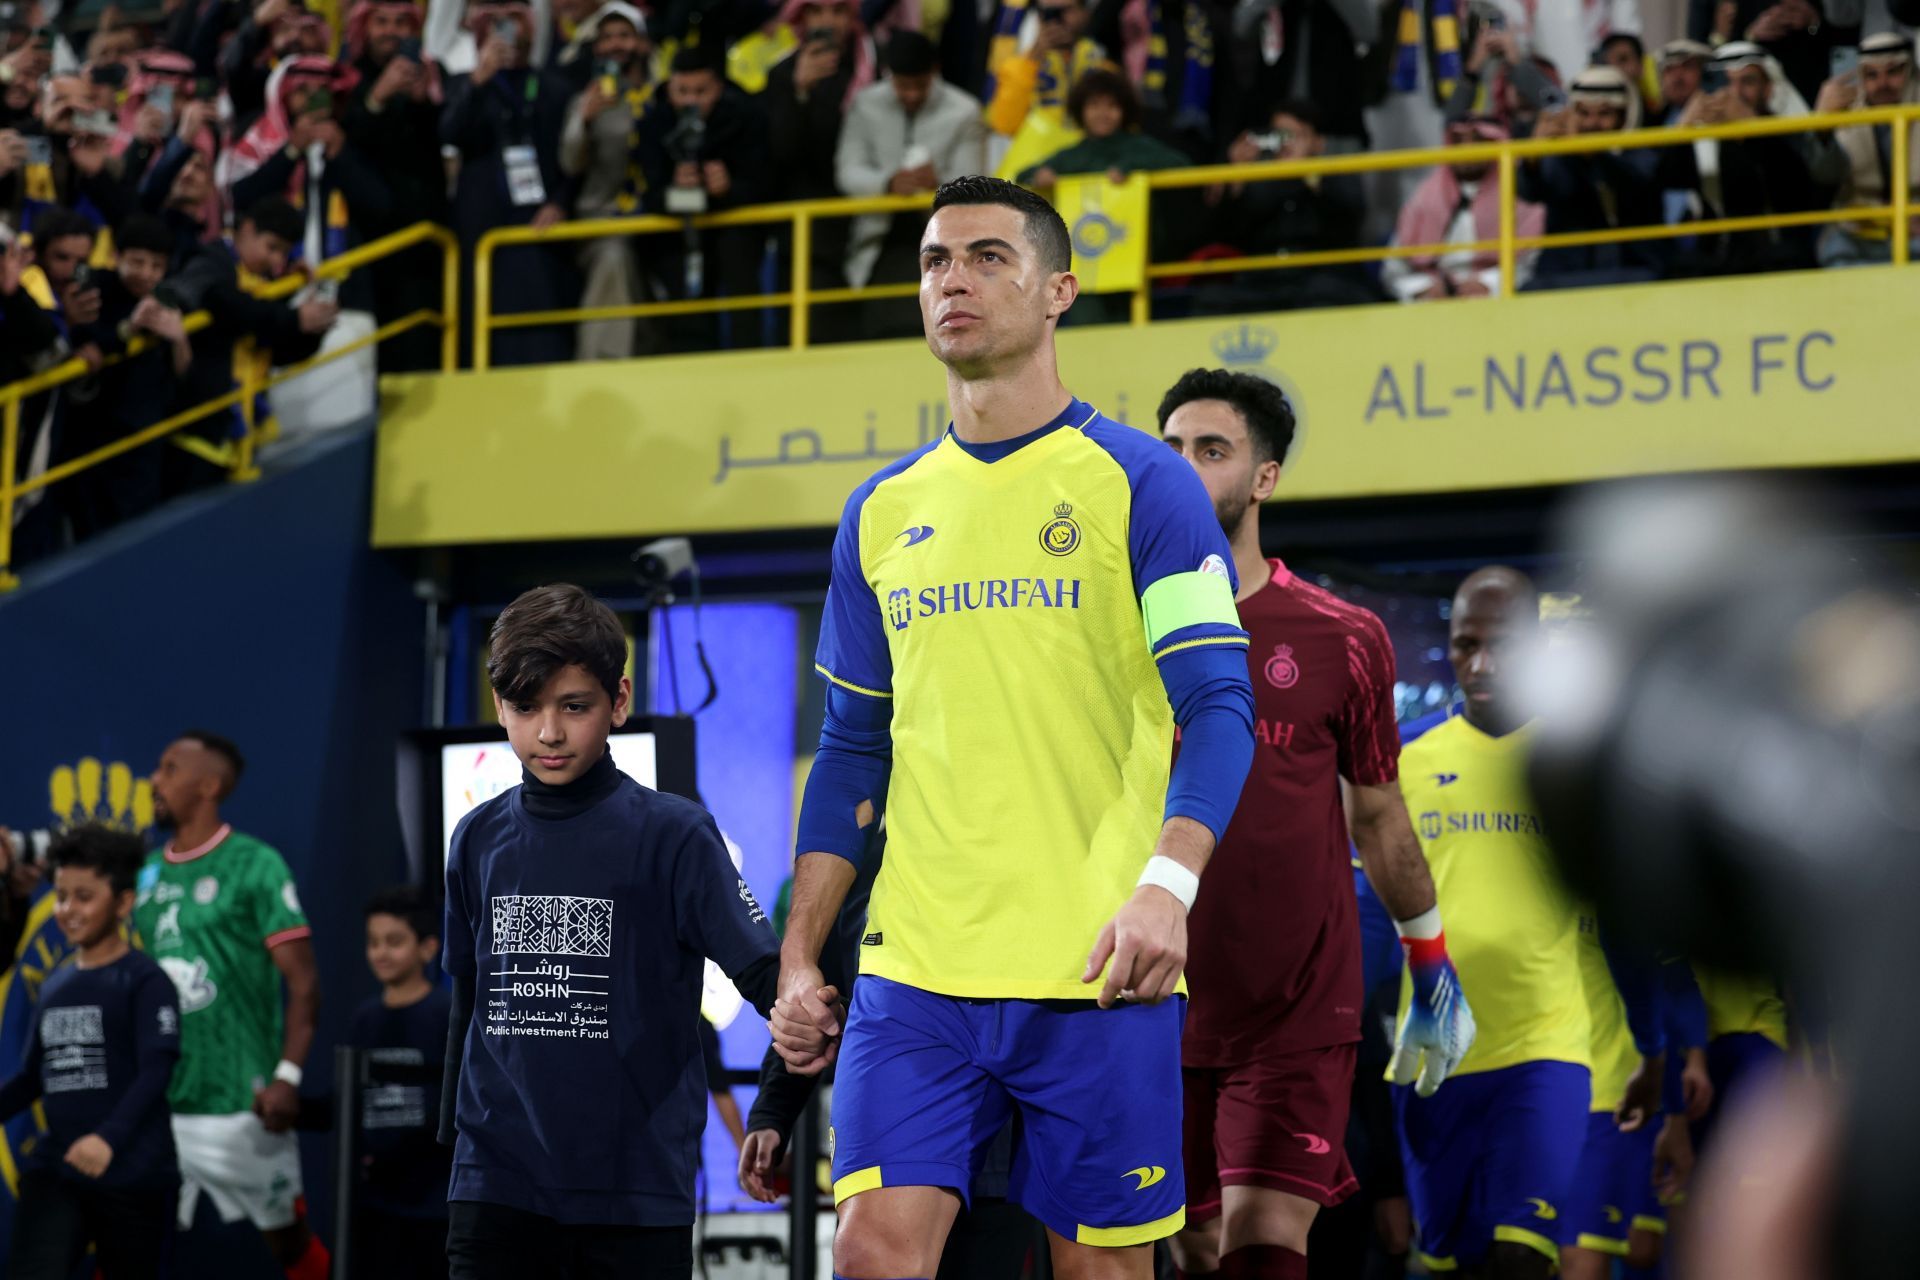 Cristiano Ronaldo was nearly joined by Messi in Saudi.